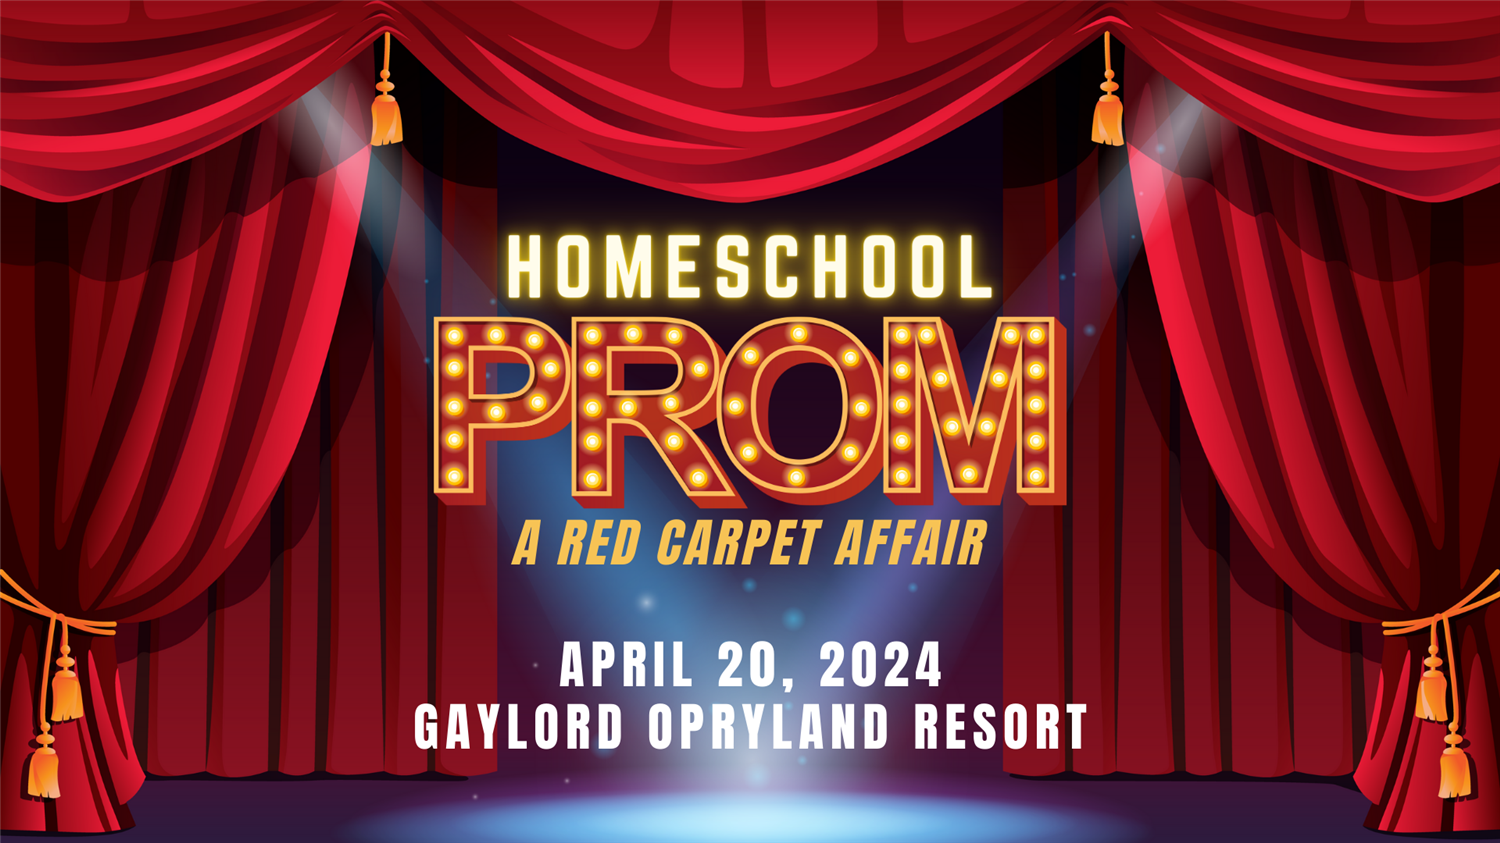 A Red Carpet Affair 2024 Homeschool Prom on Apr 20, 17:30@Gaylord Opryland Resort & Convention Center - Pick a seat, Buy tickets and Get information on CHESS Ticketing Platform tickets.homeschoolinglife.org